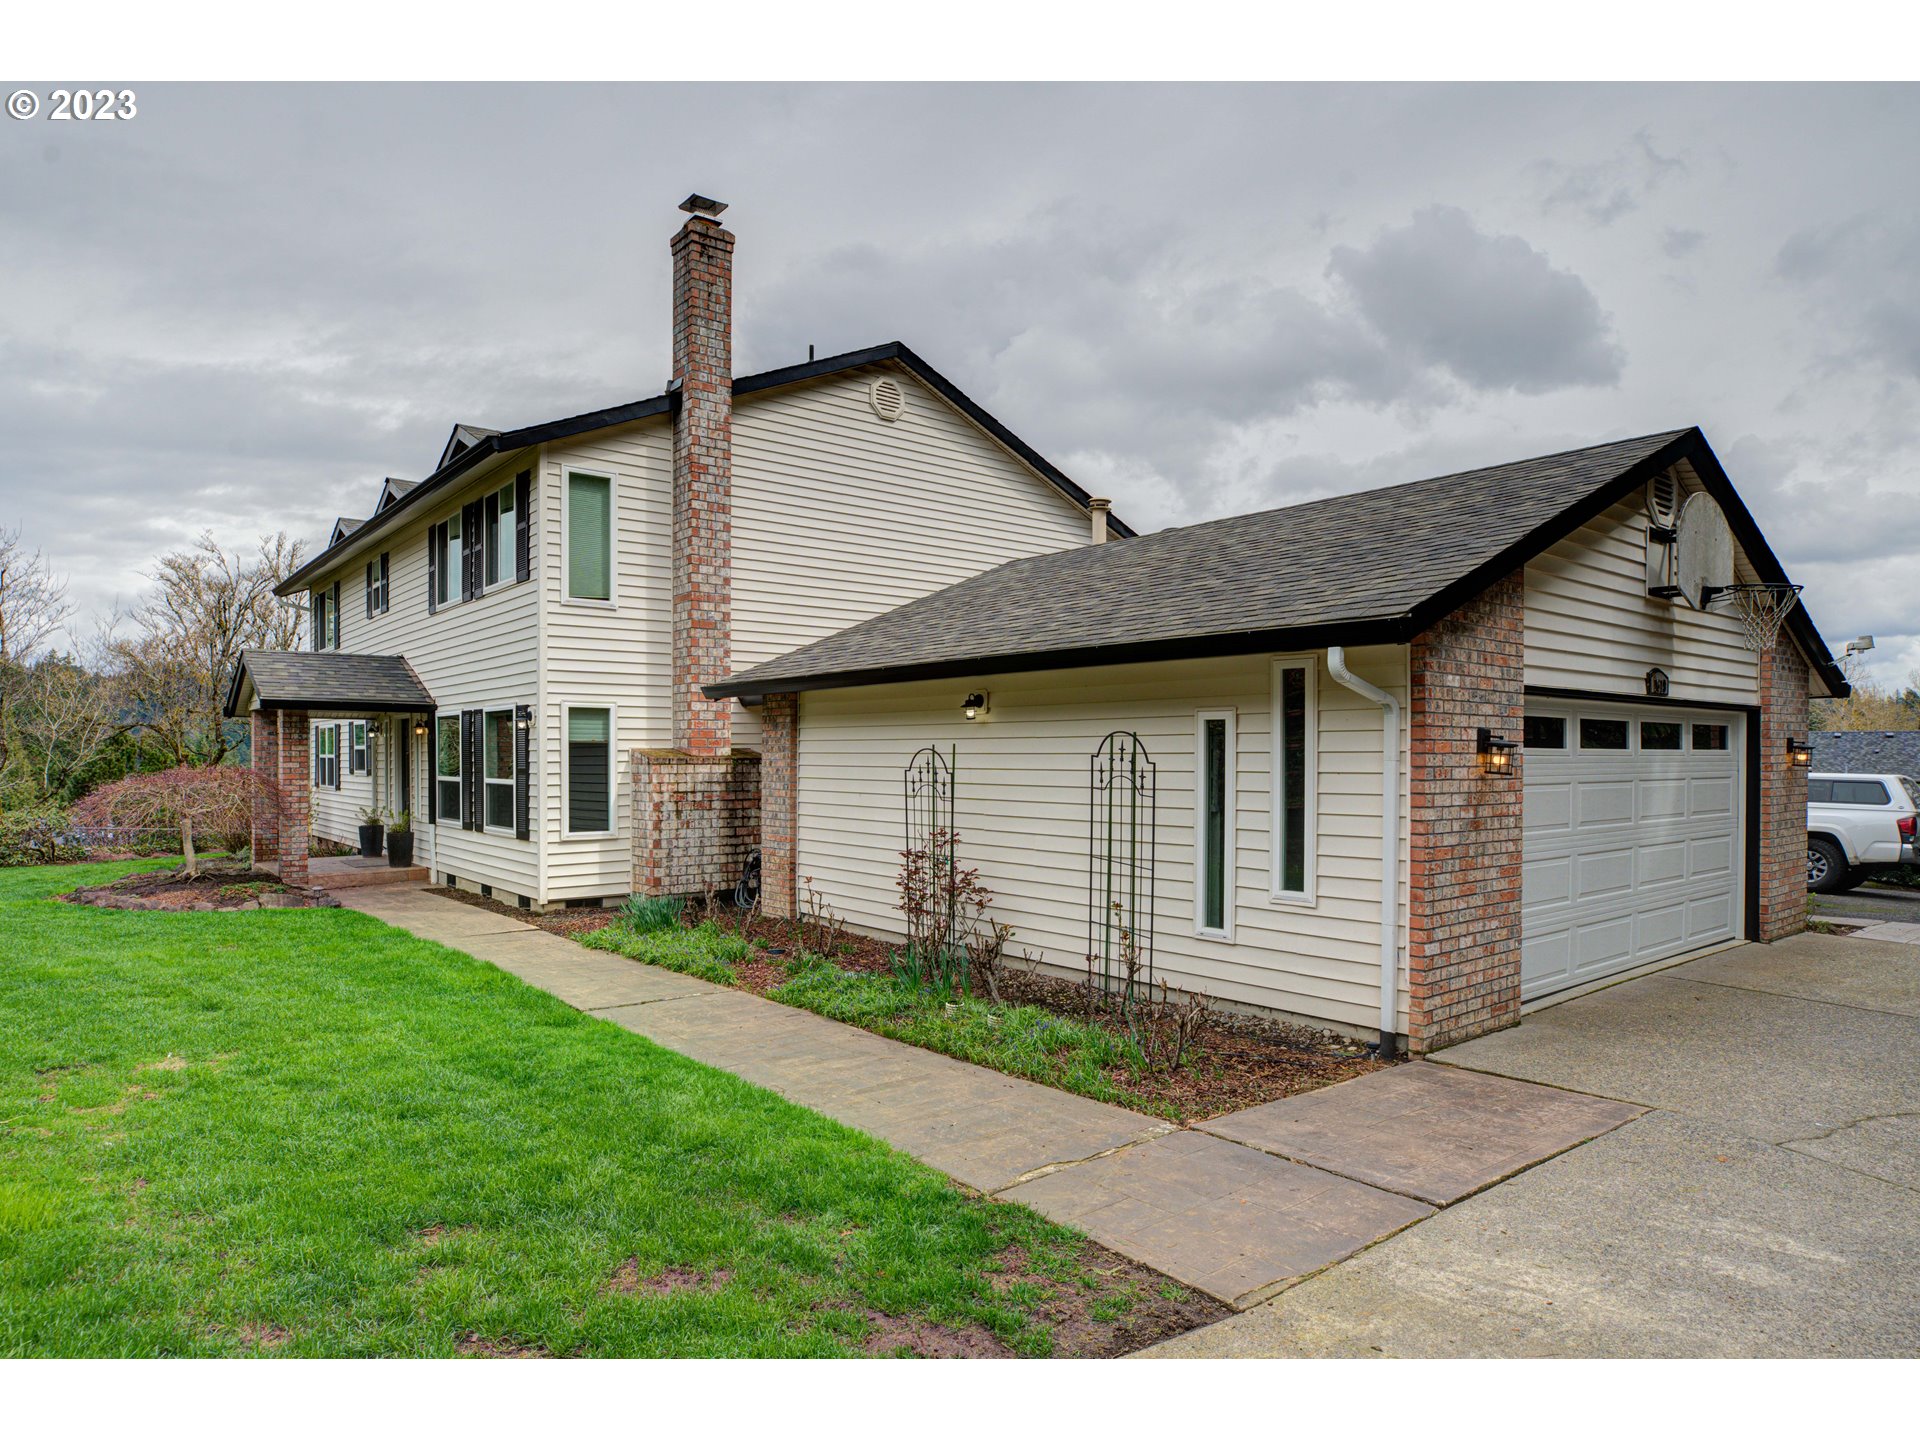 1619 SE SANDY DELL RD, Troutdale, OR 